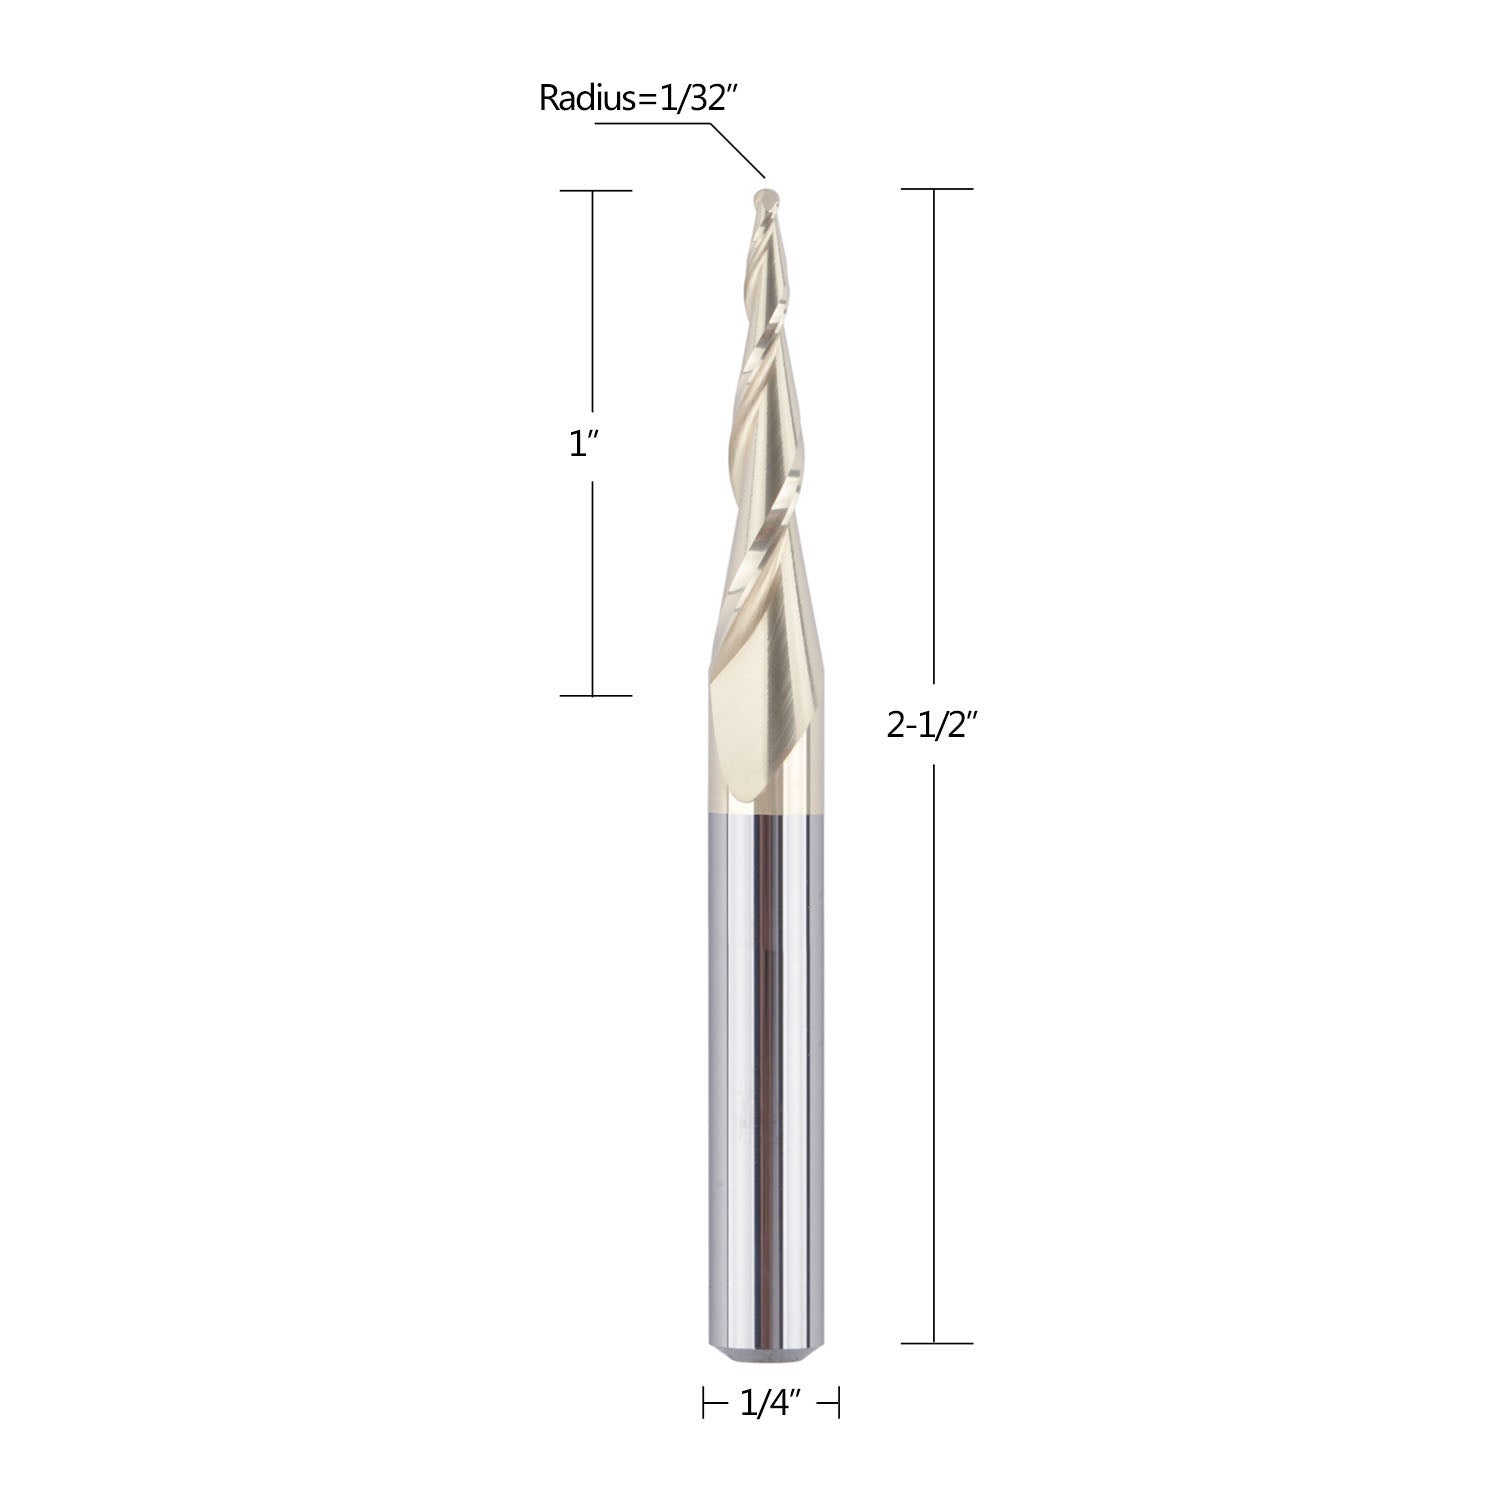 SpeTool 1/32" Radius Tapered Ball Nose CNC Carving Bit ZrN Coated Router Bit